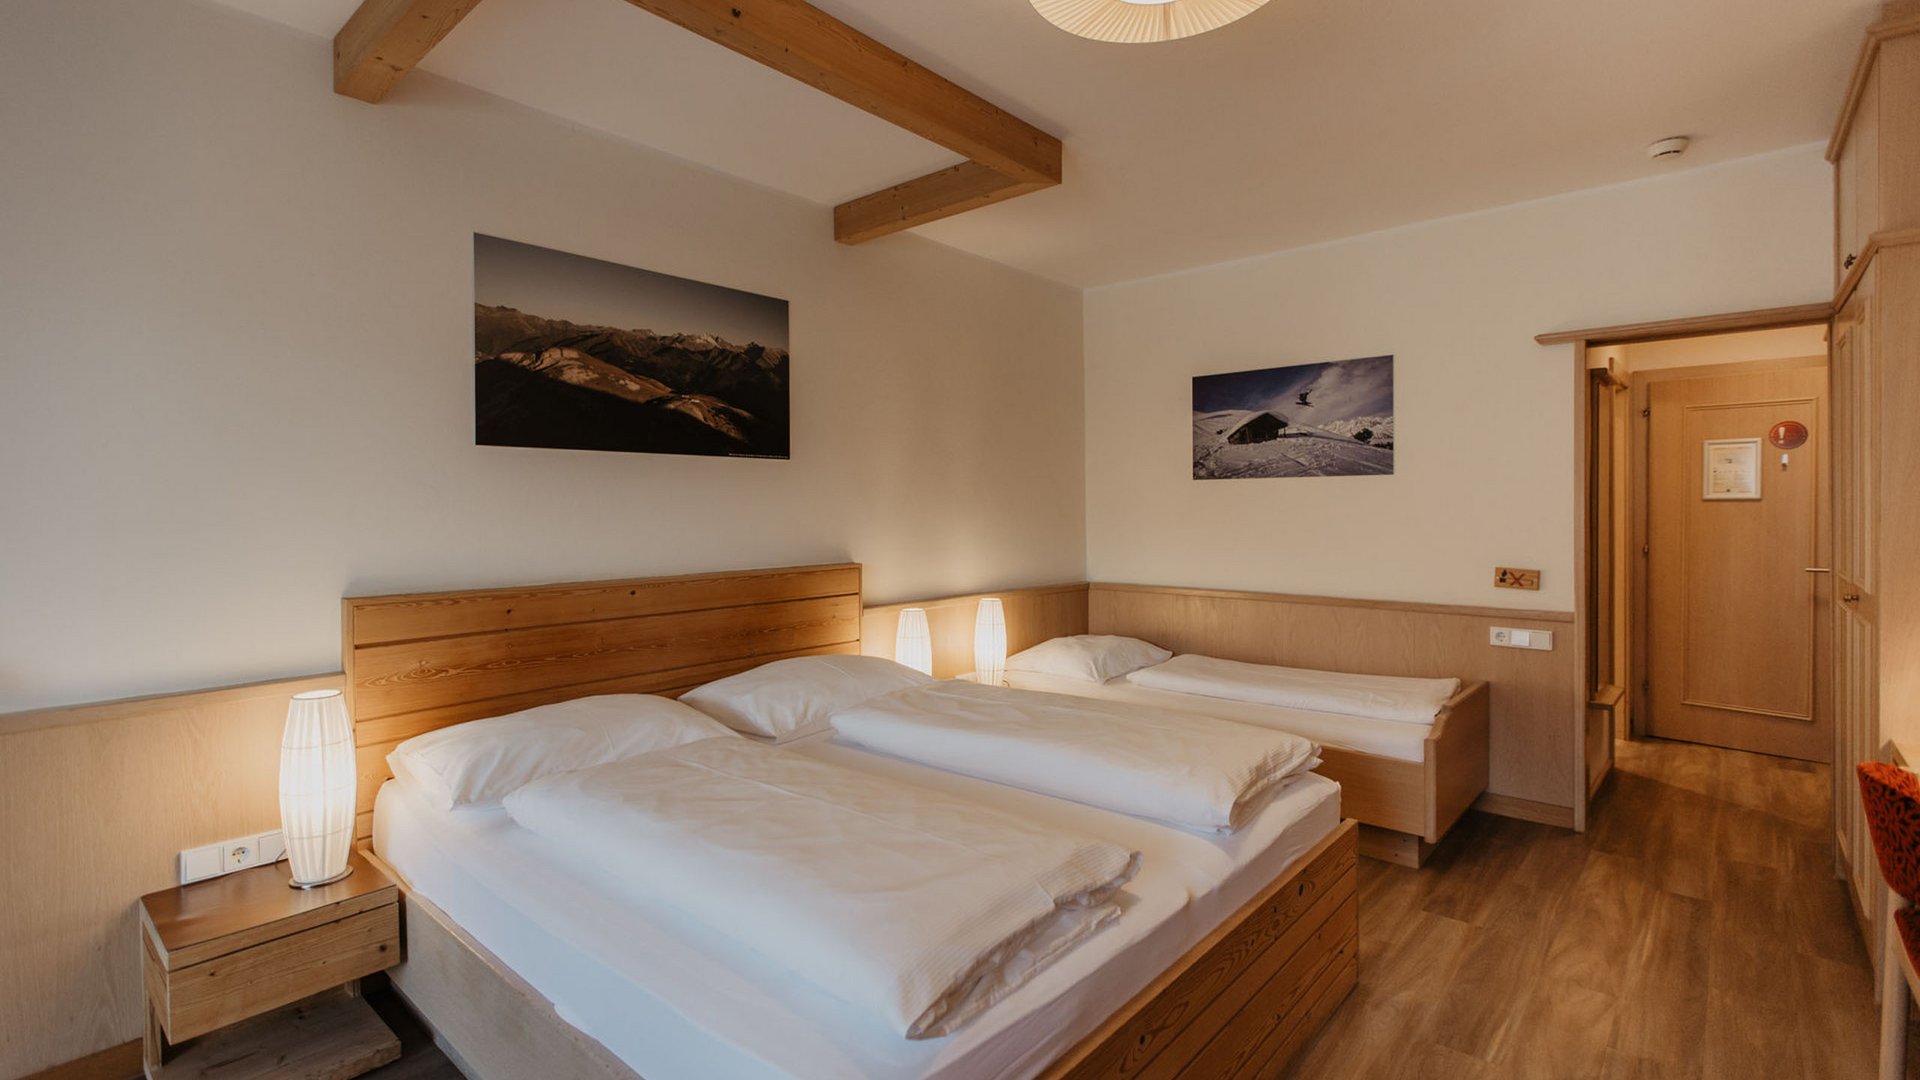 Your cosy overnight stay in Matrei